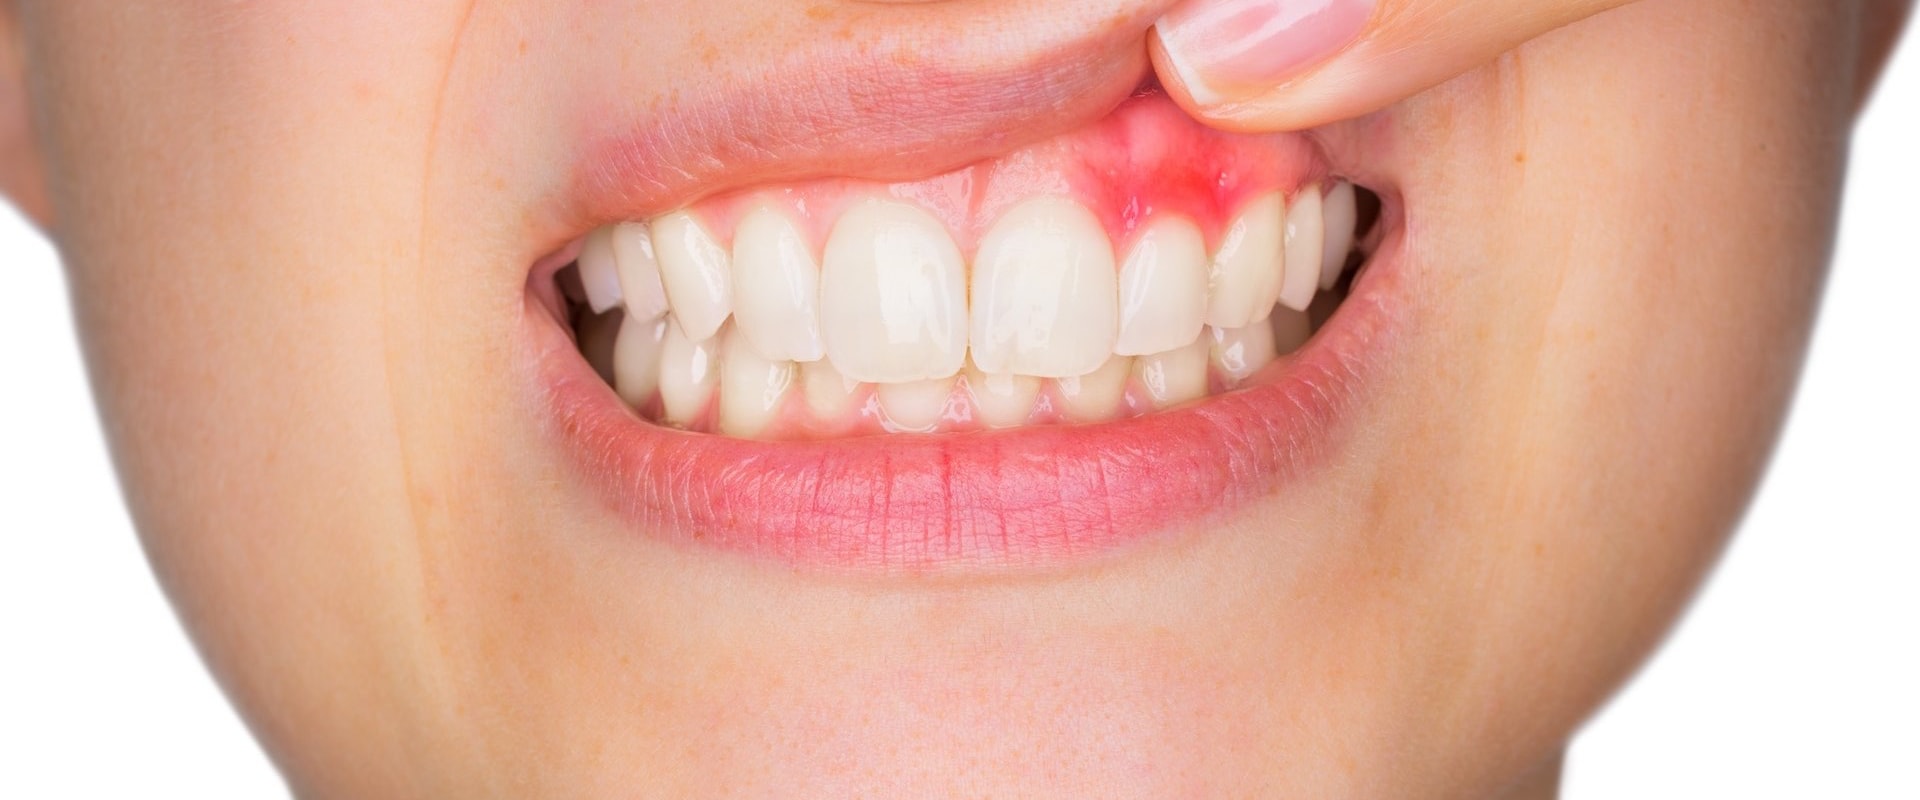 How do you know if your gums are damaged?